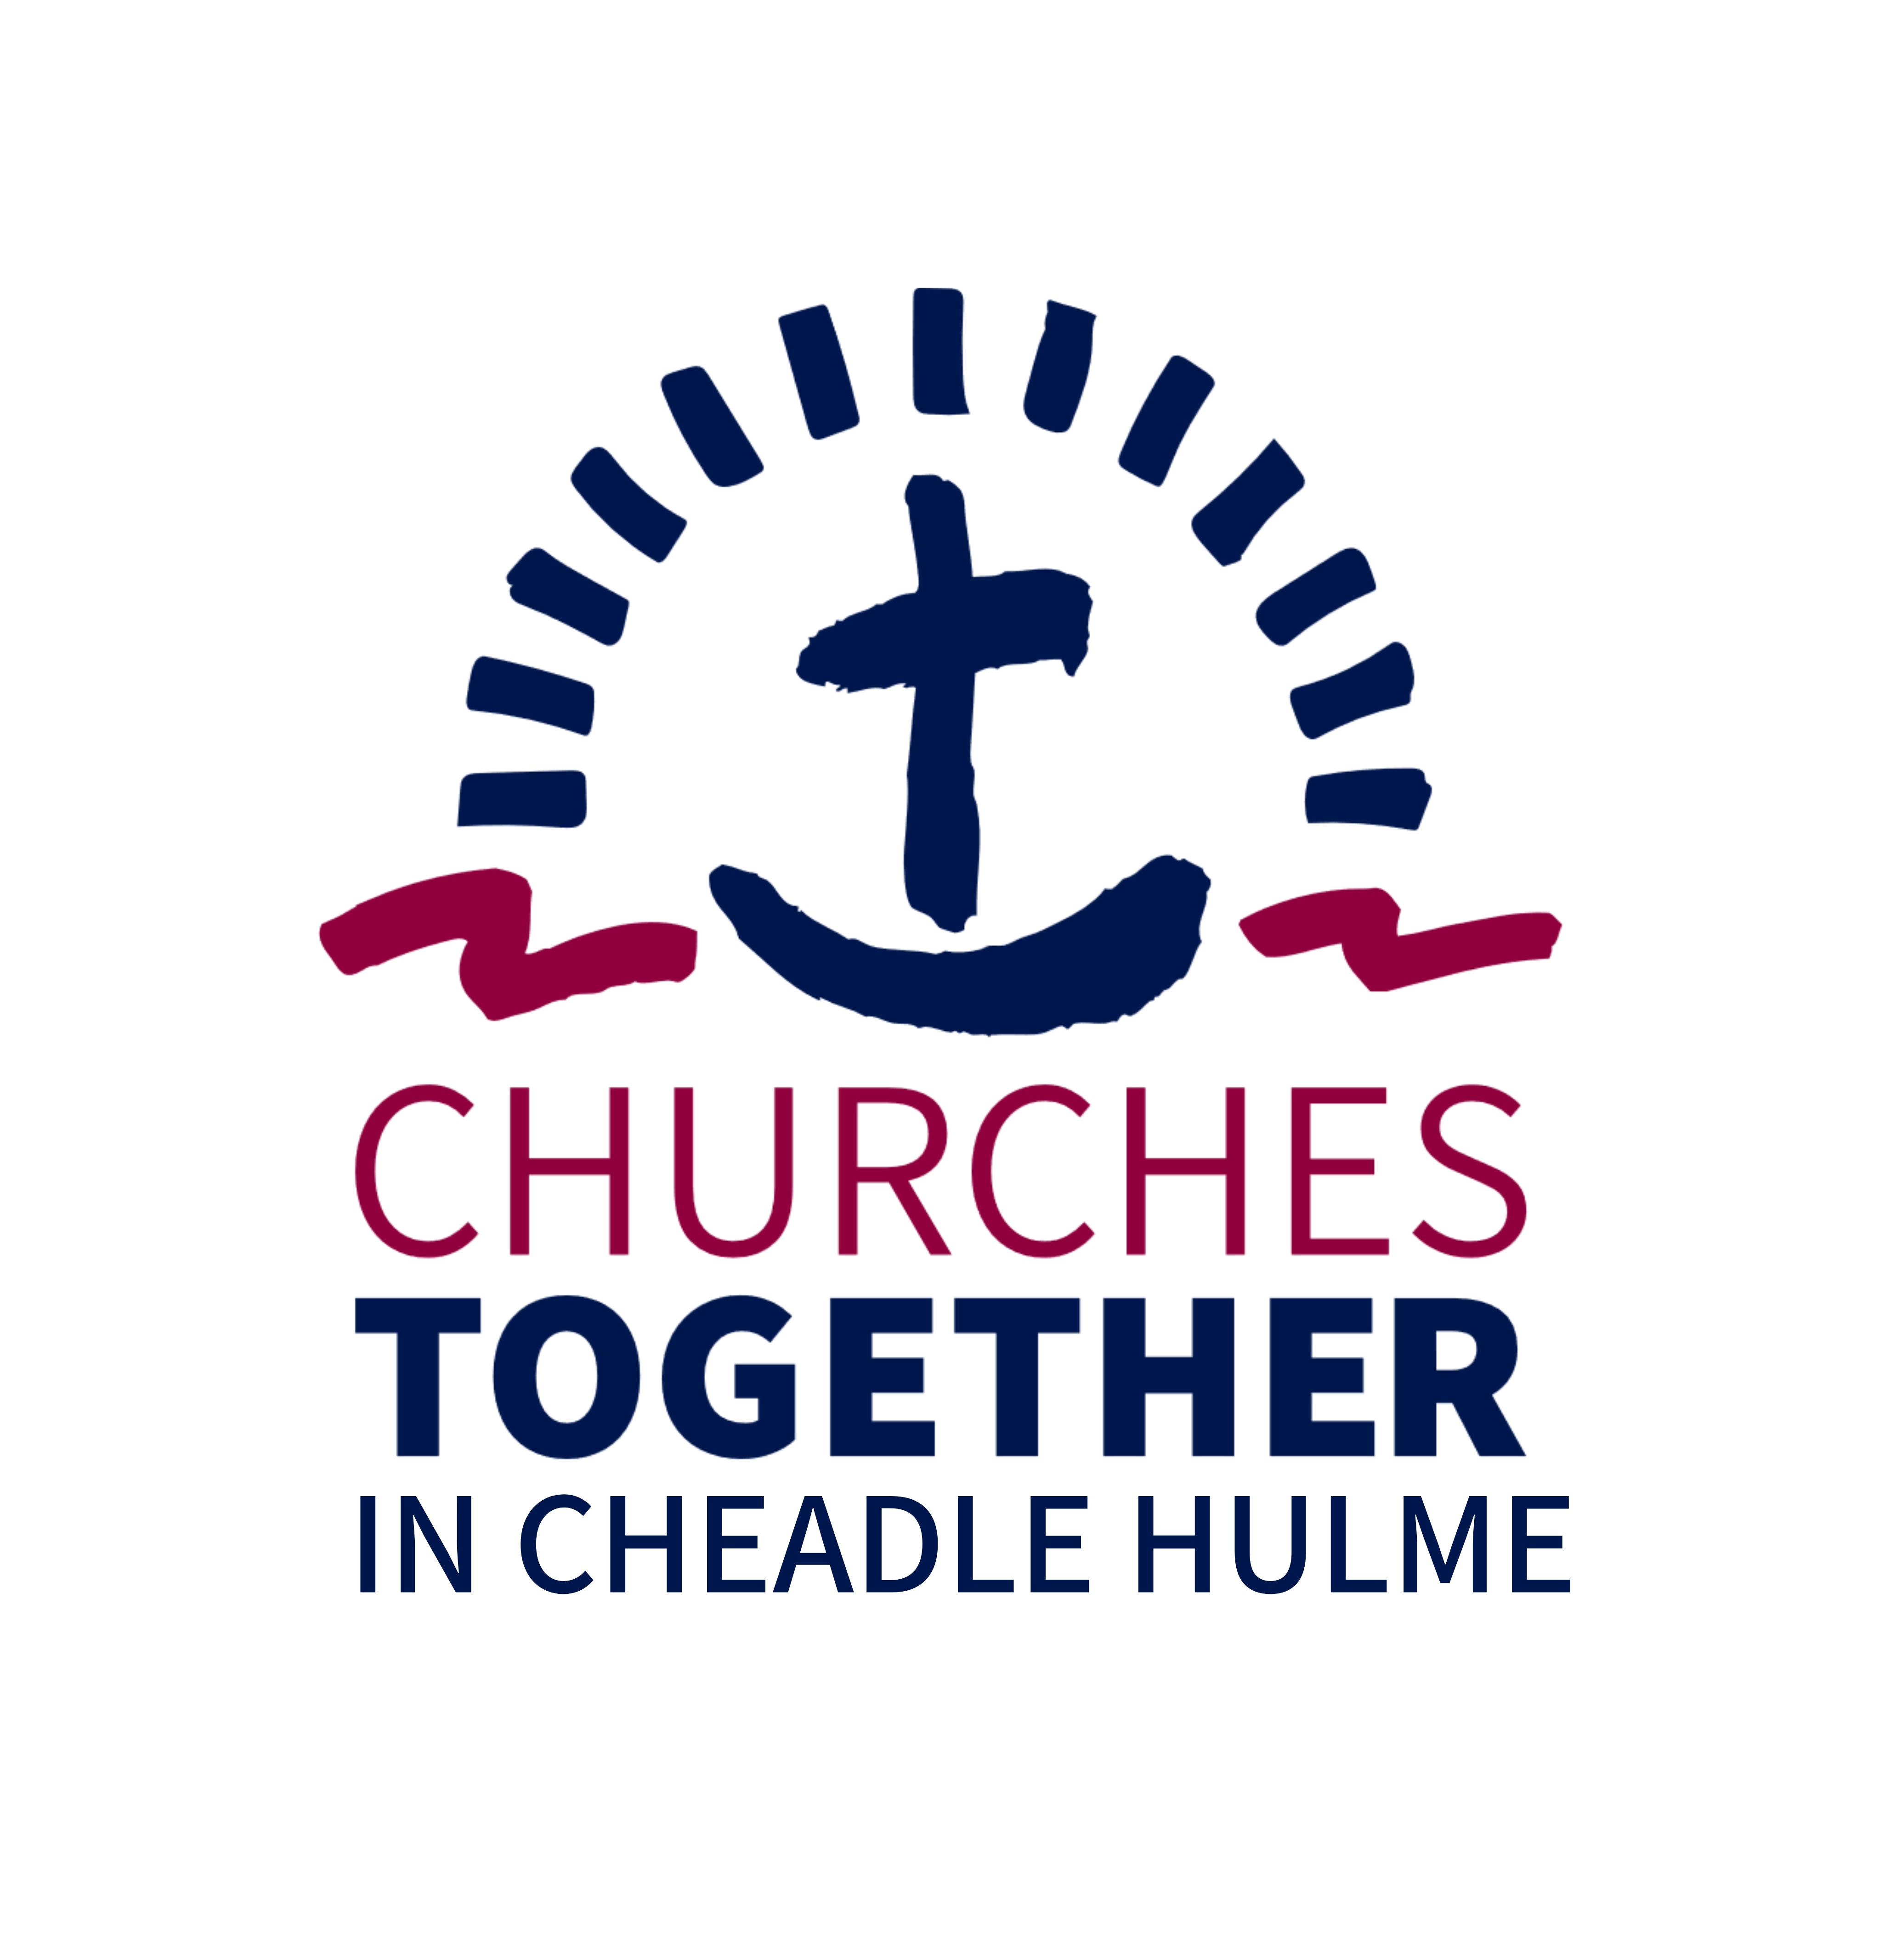 Churches Together in Cheadle Hulme